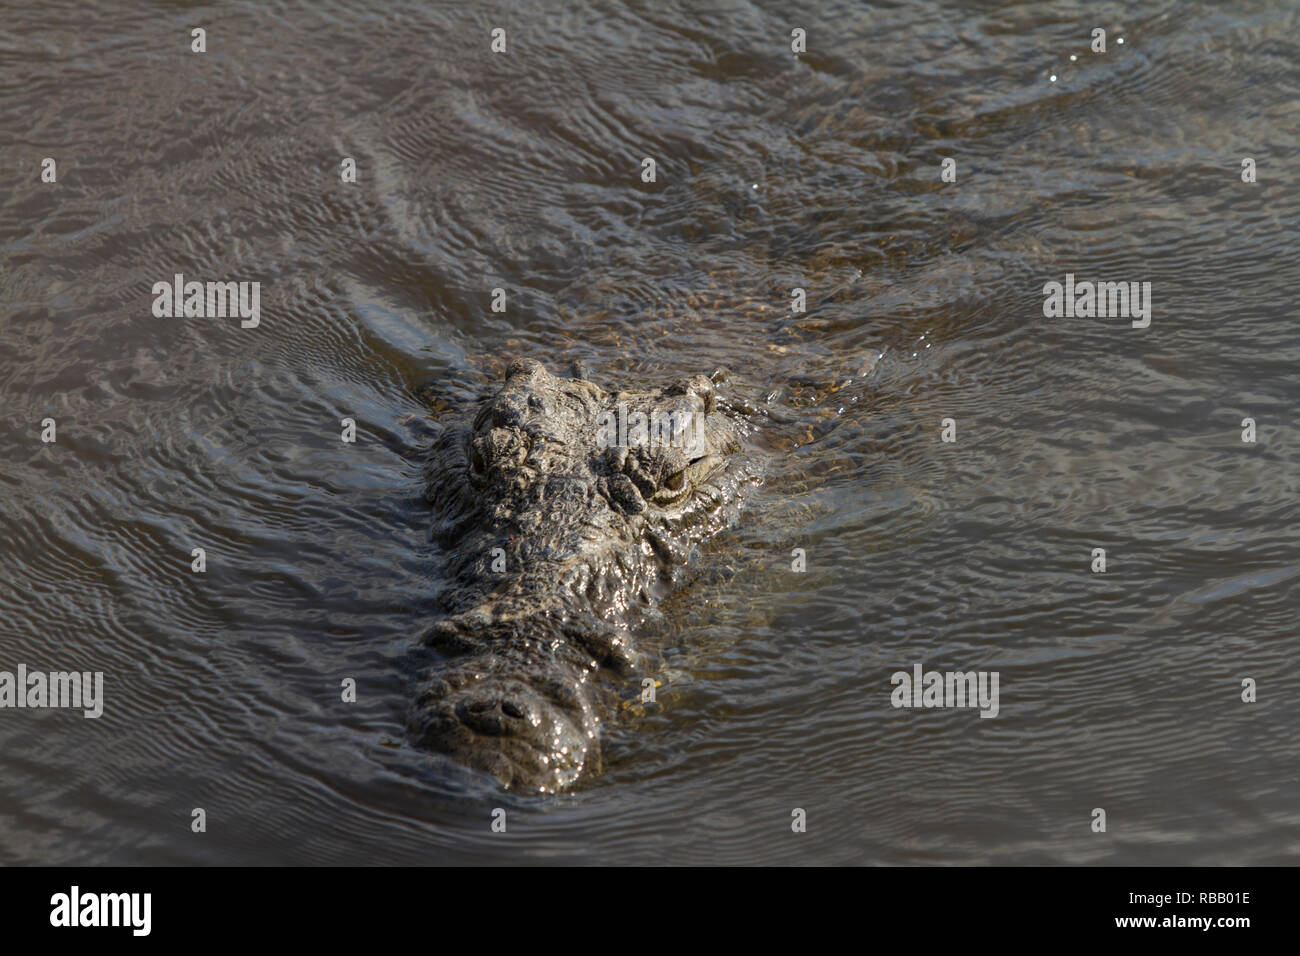 Crocodile head emerges from a river, Kruger National Park, South Africa Stock Photo